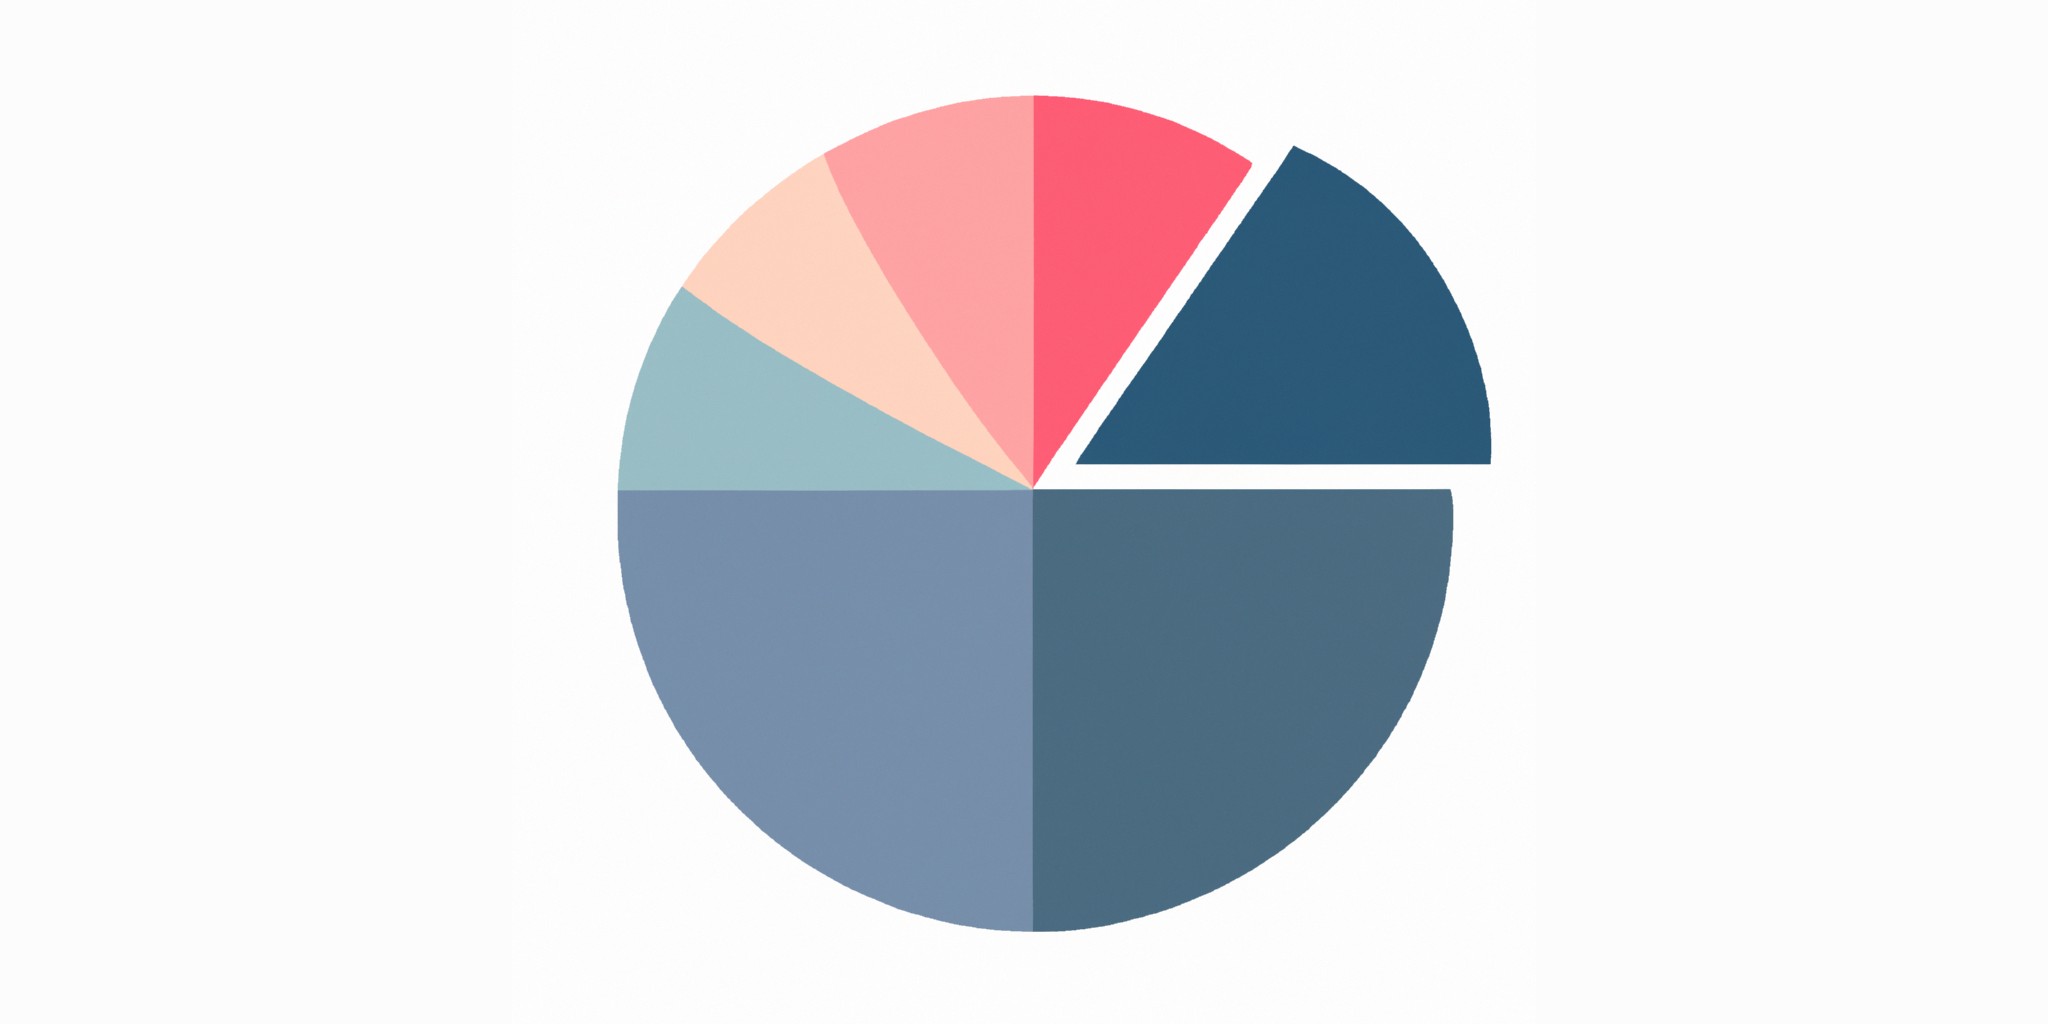 a pie or pie graph in flat illustration style with gradients and white background